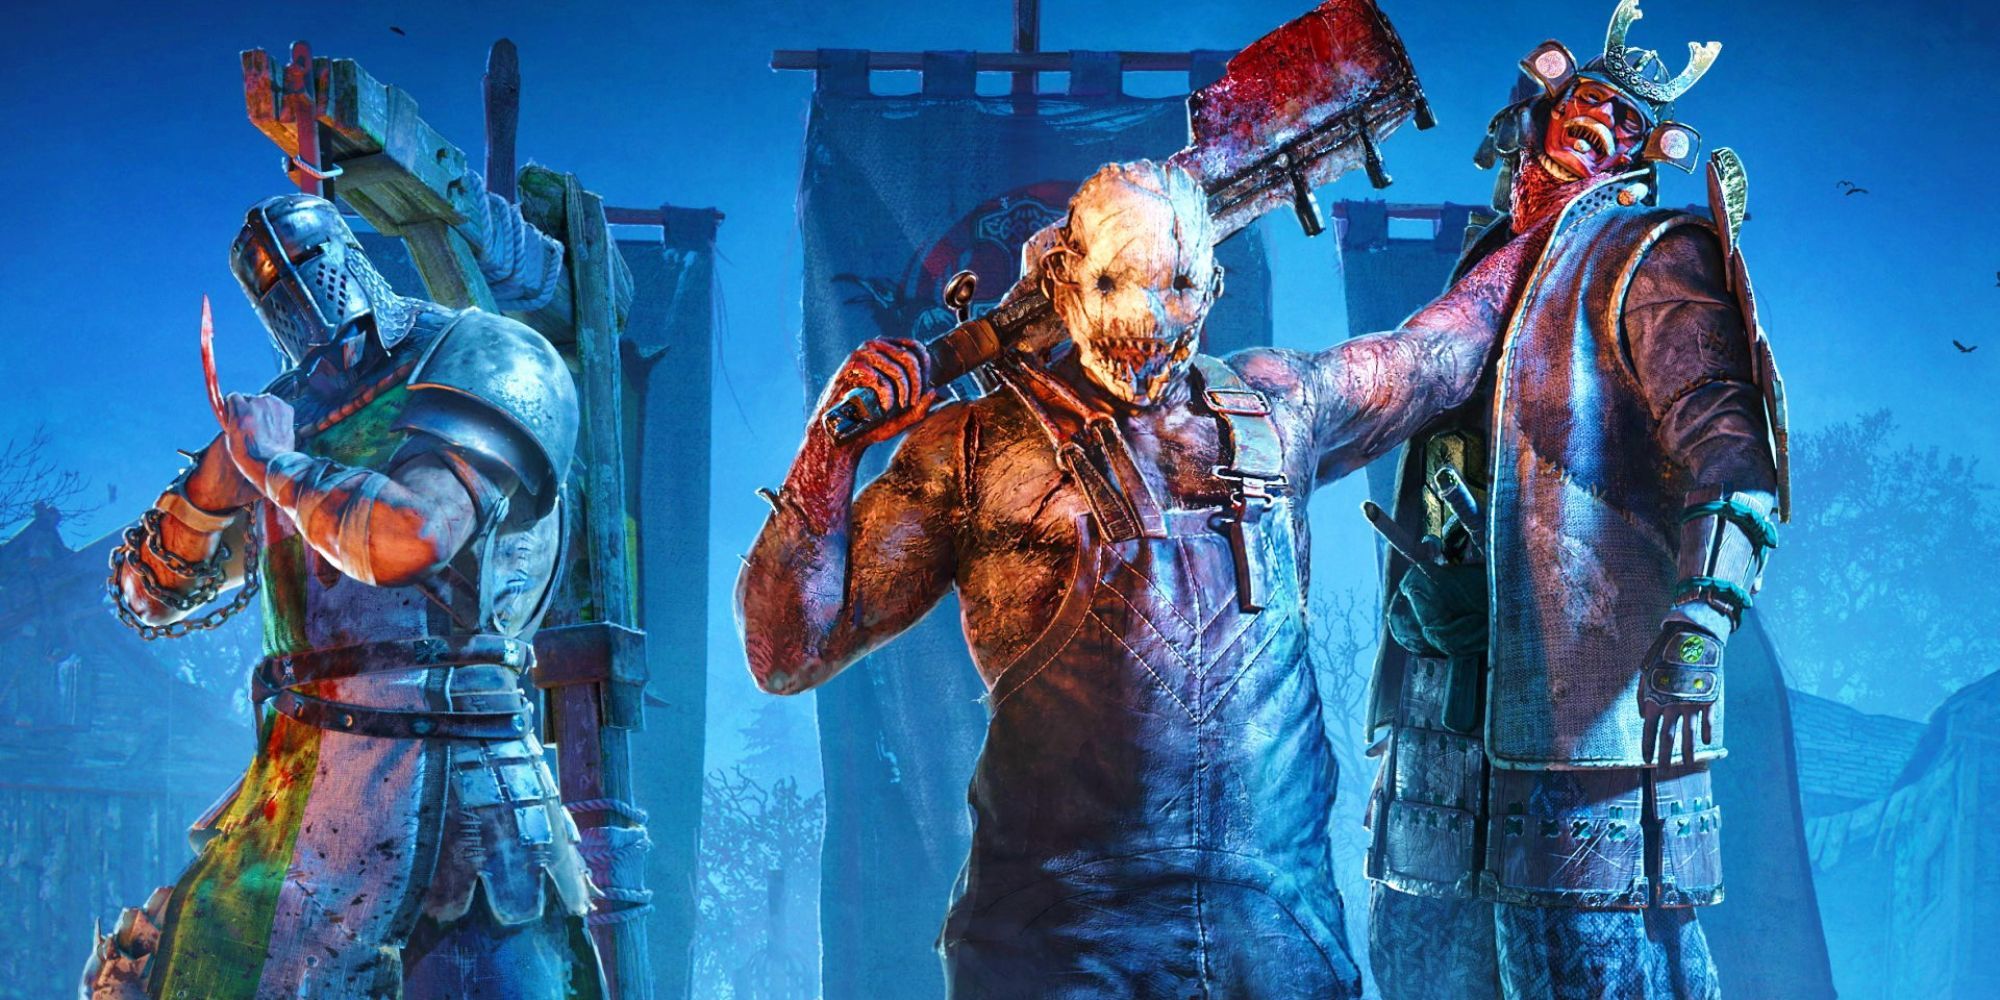 The trapped from dead by daylight holding a character from For Honor in the game For Honor